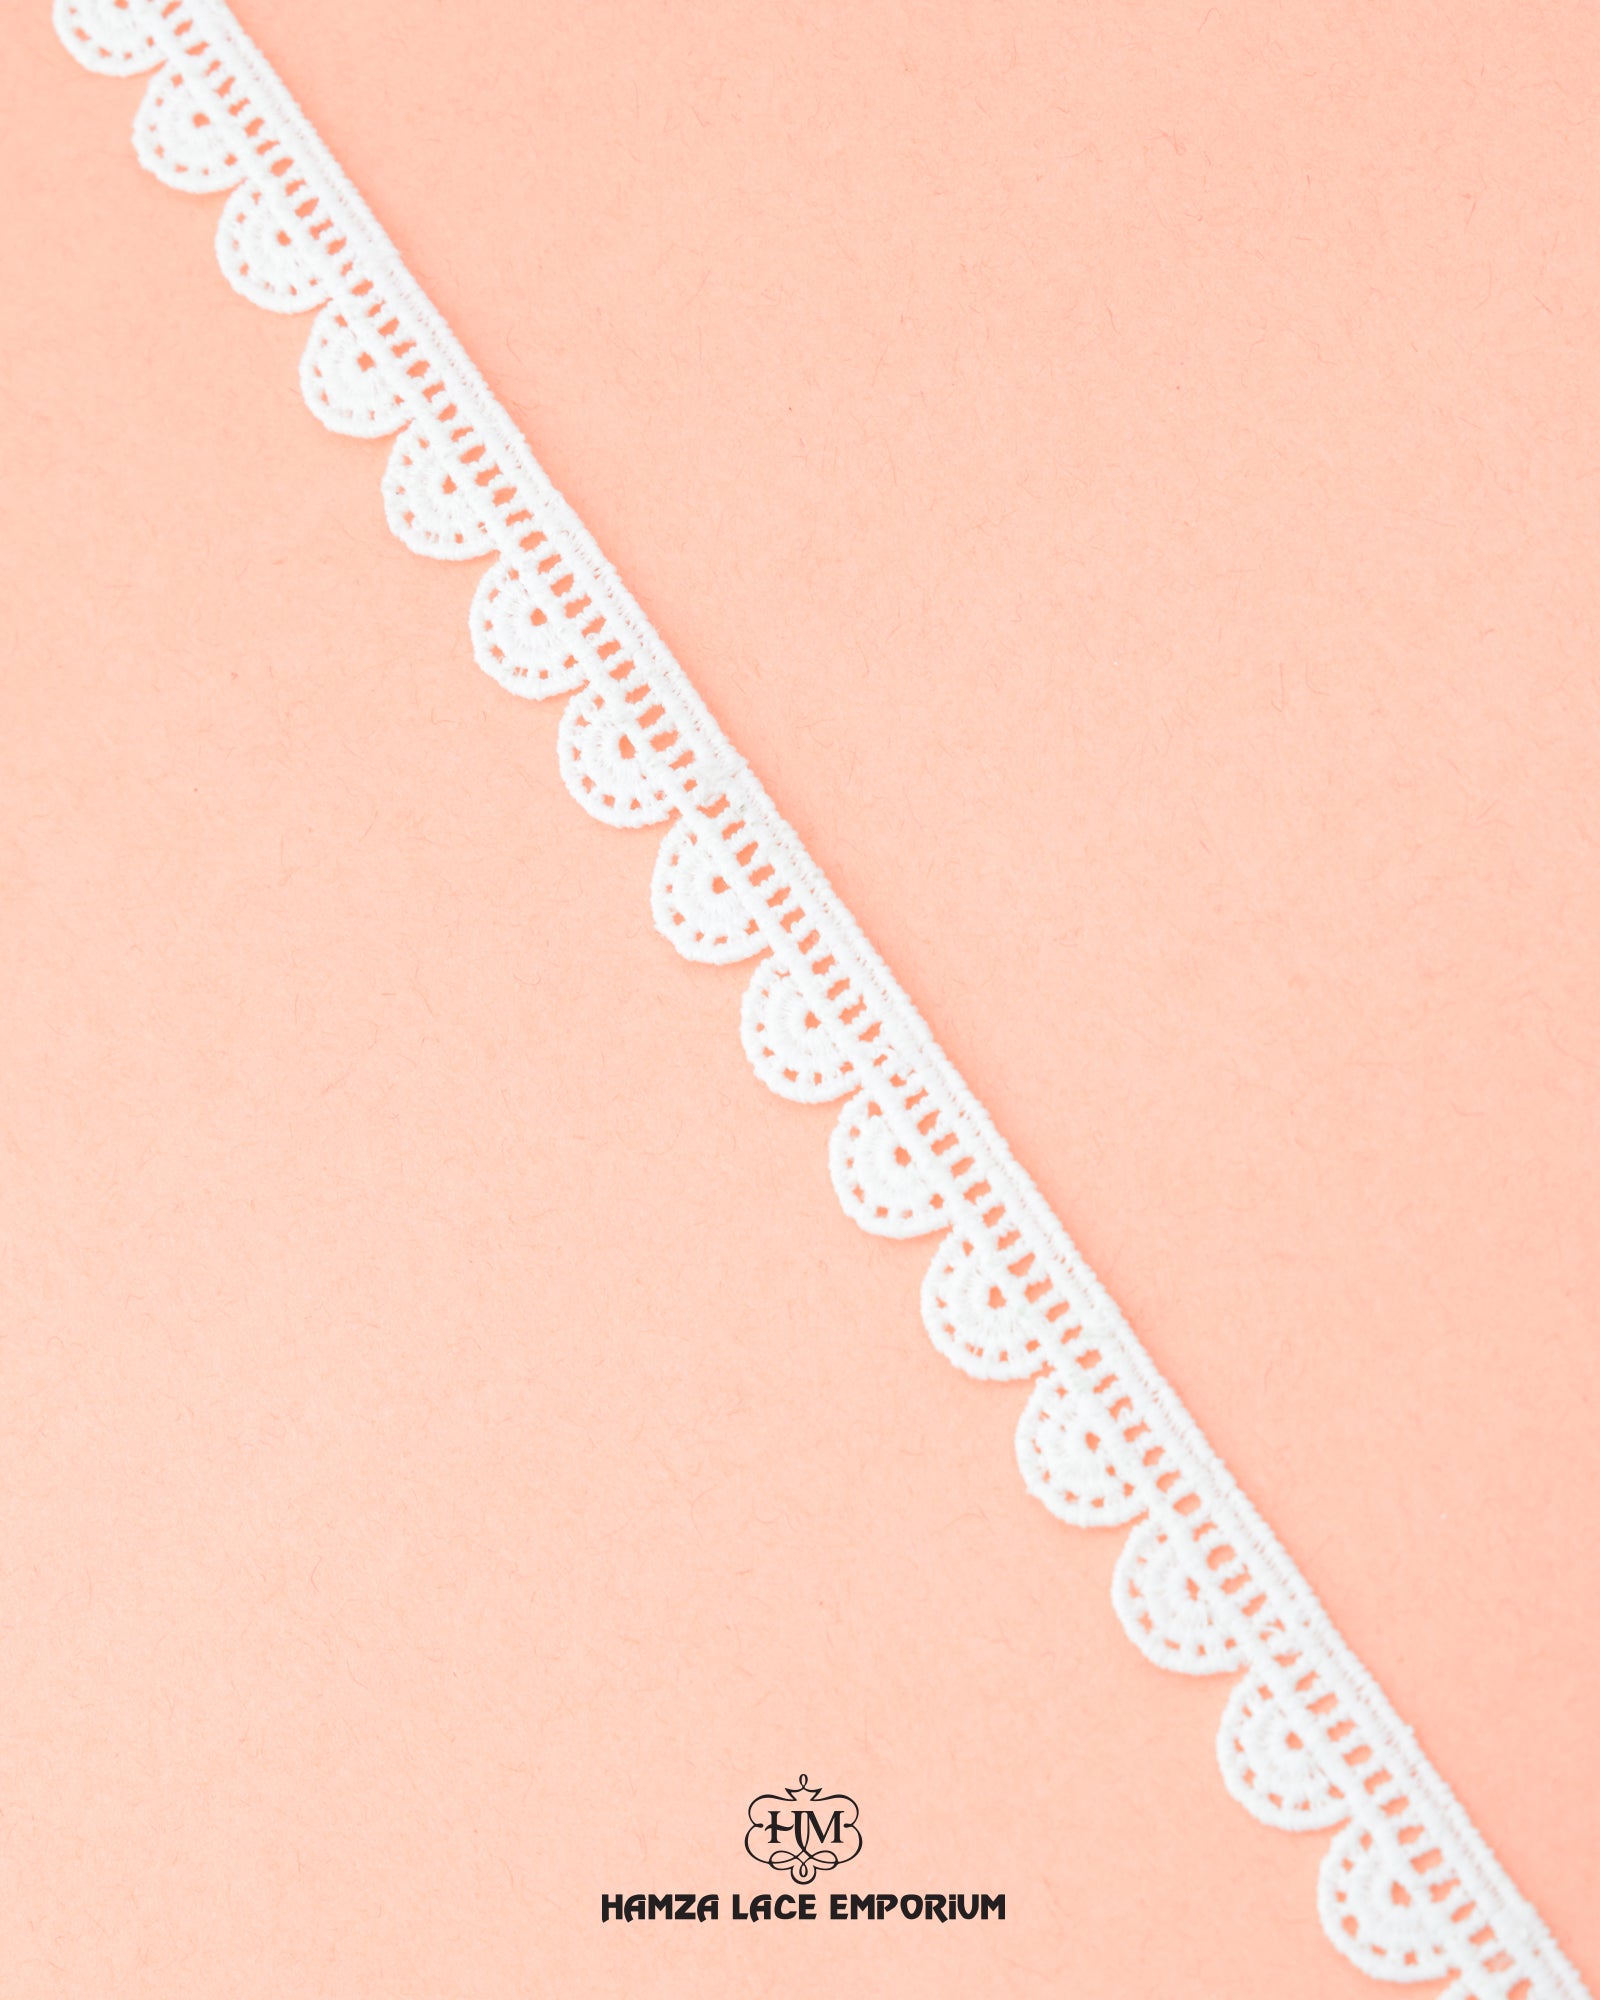 'Edging Loop lace 2763' with the 'Hamza Lace' sign